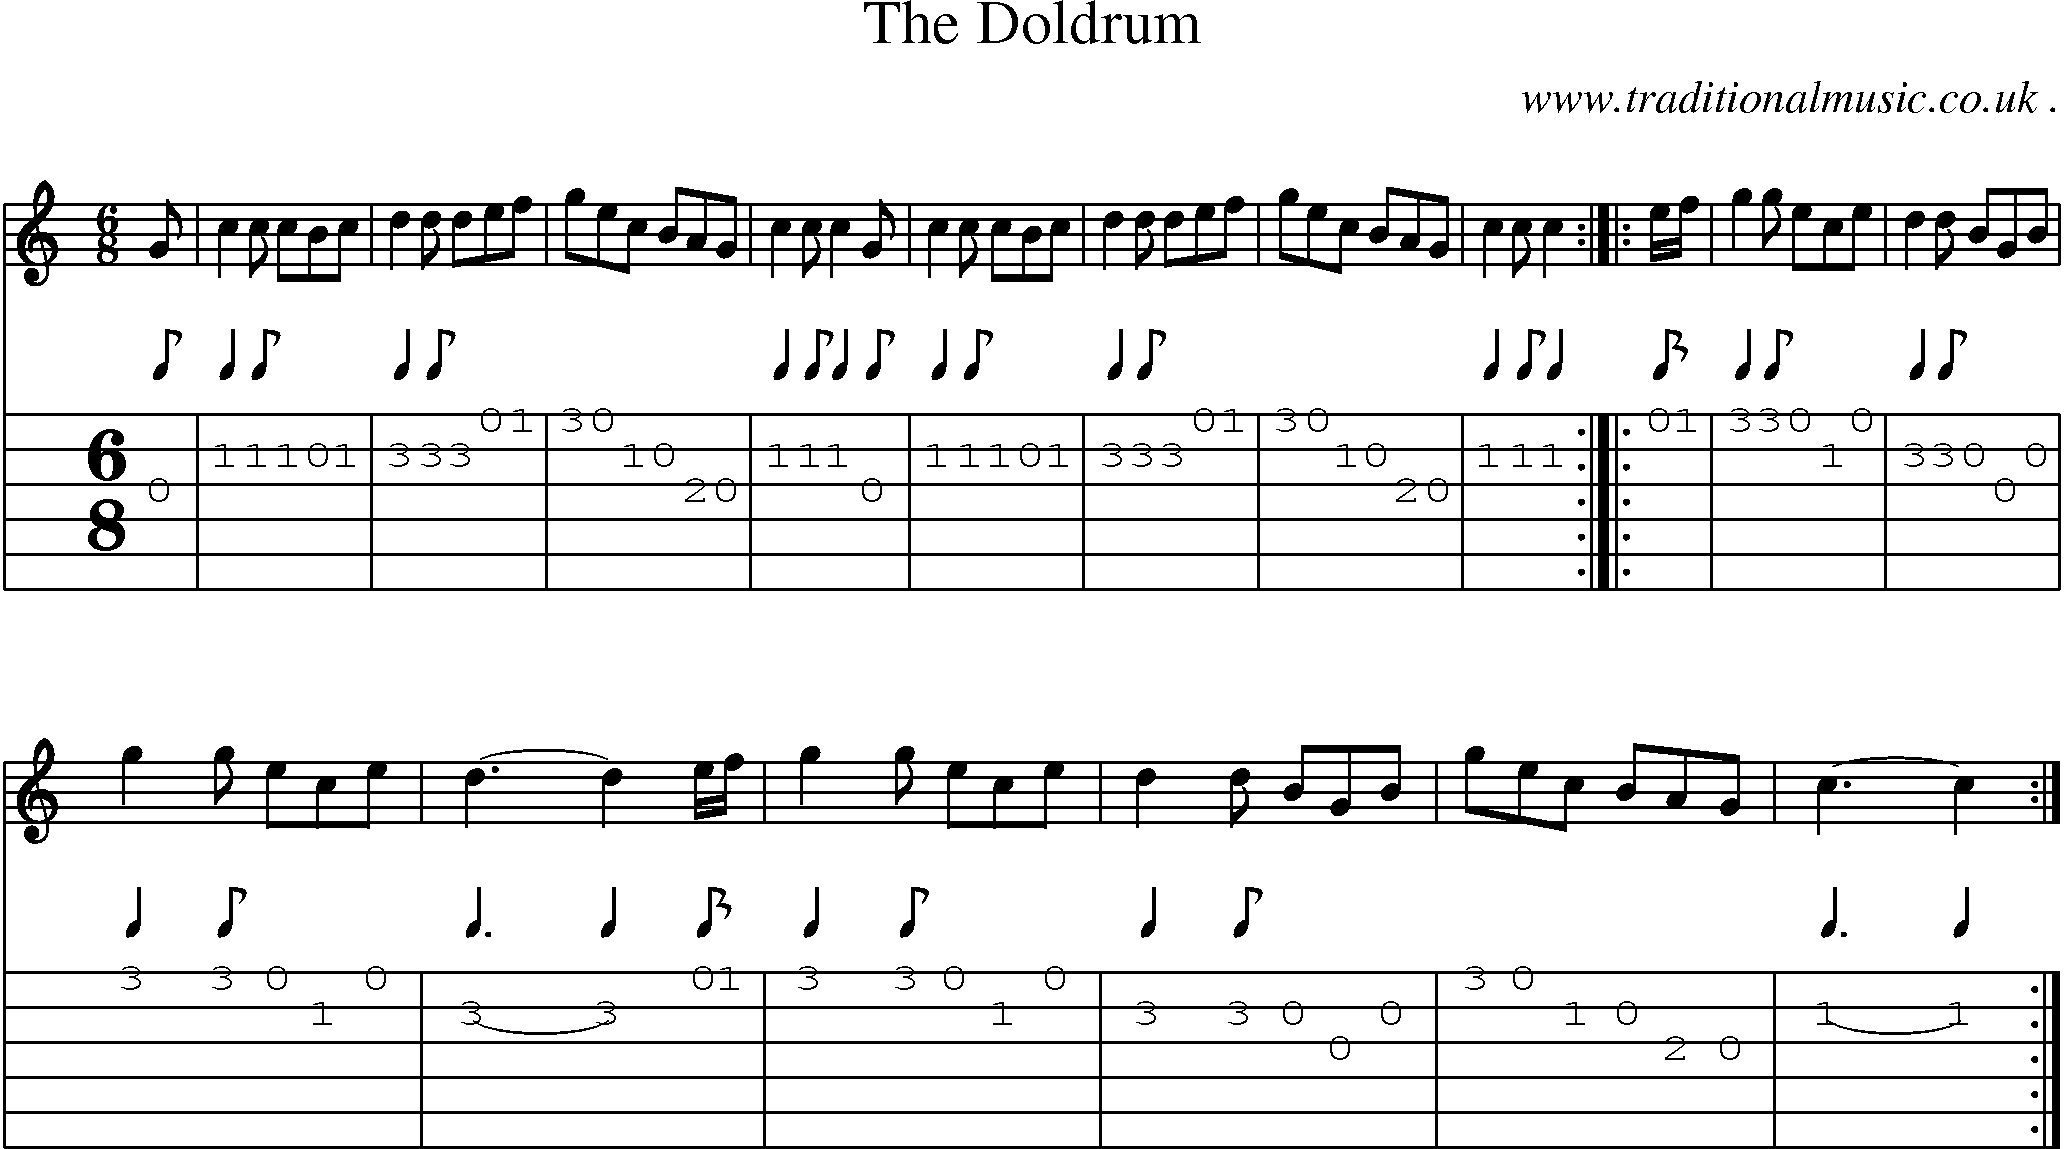 Sheet-Music and Guitar Tabs for The Doldrum